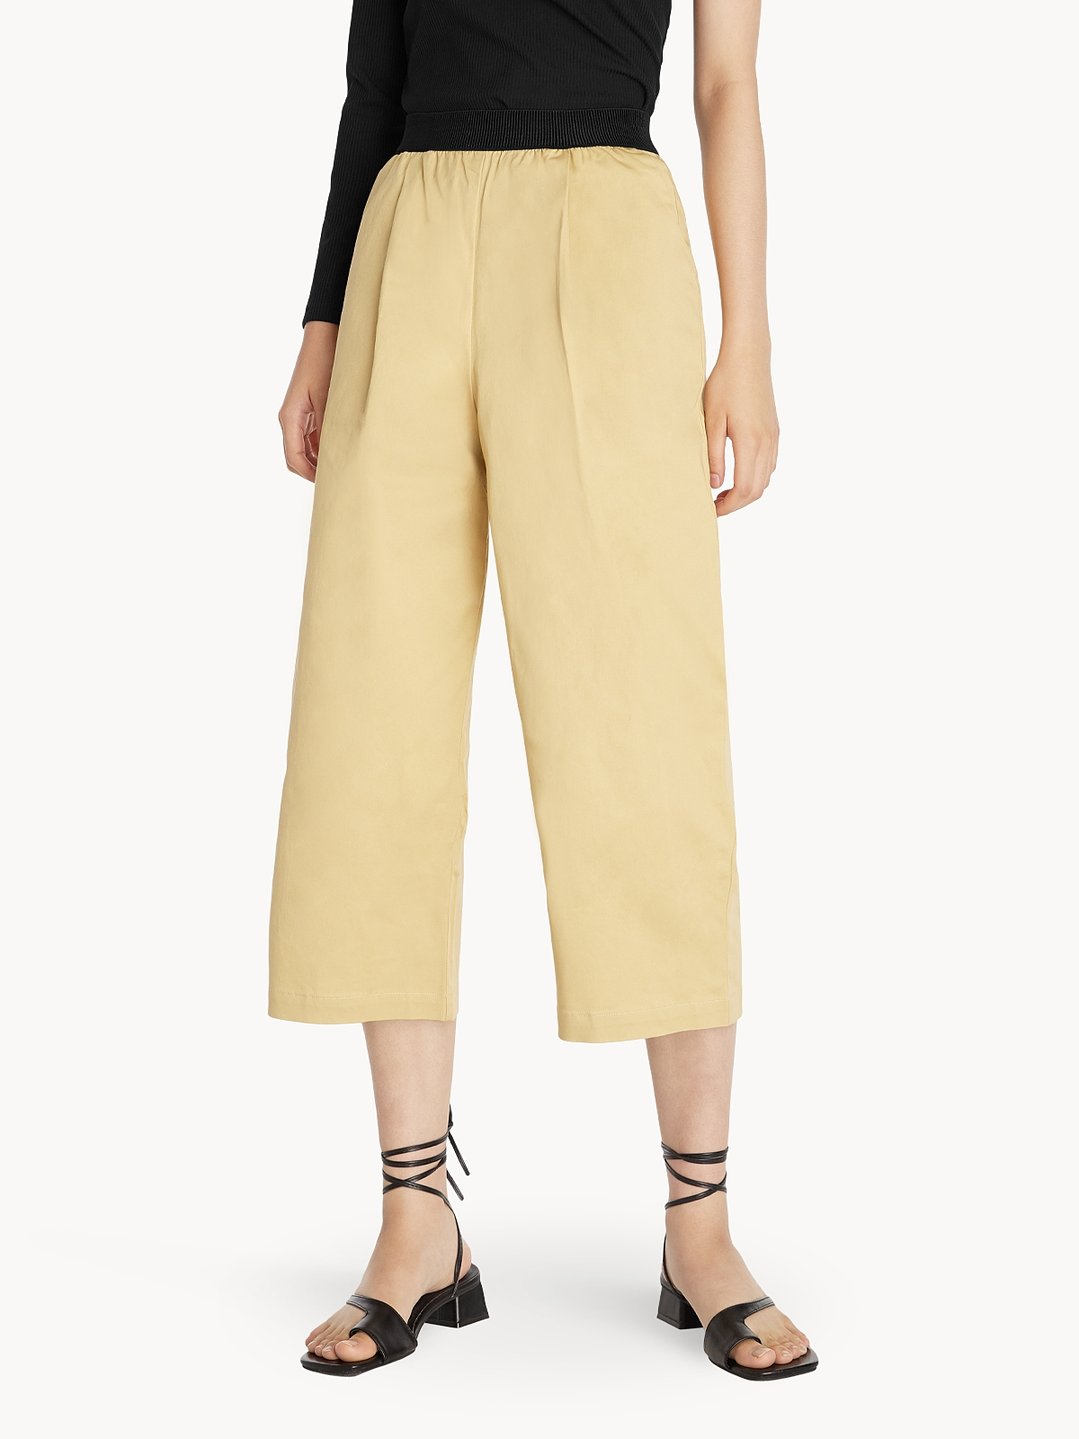 16 Pairs Of Elastic-Waist Pants To Buy ASAP – PureWow, 41% OFF